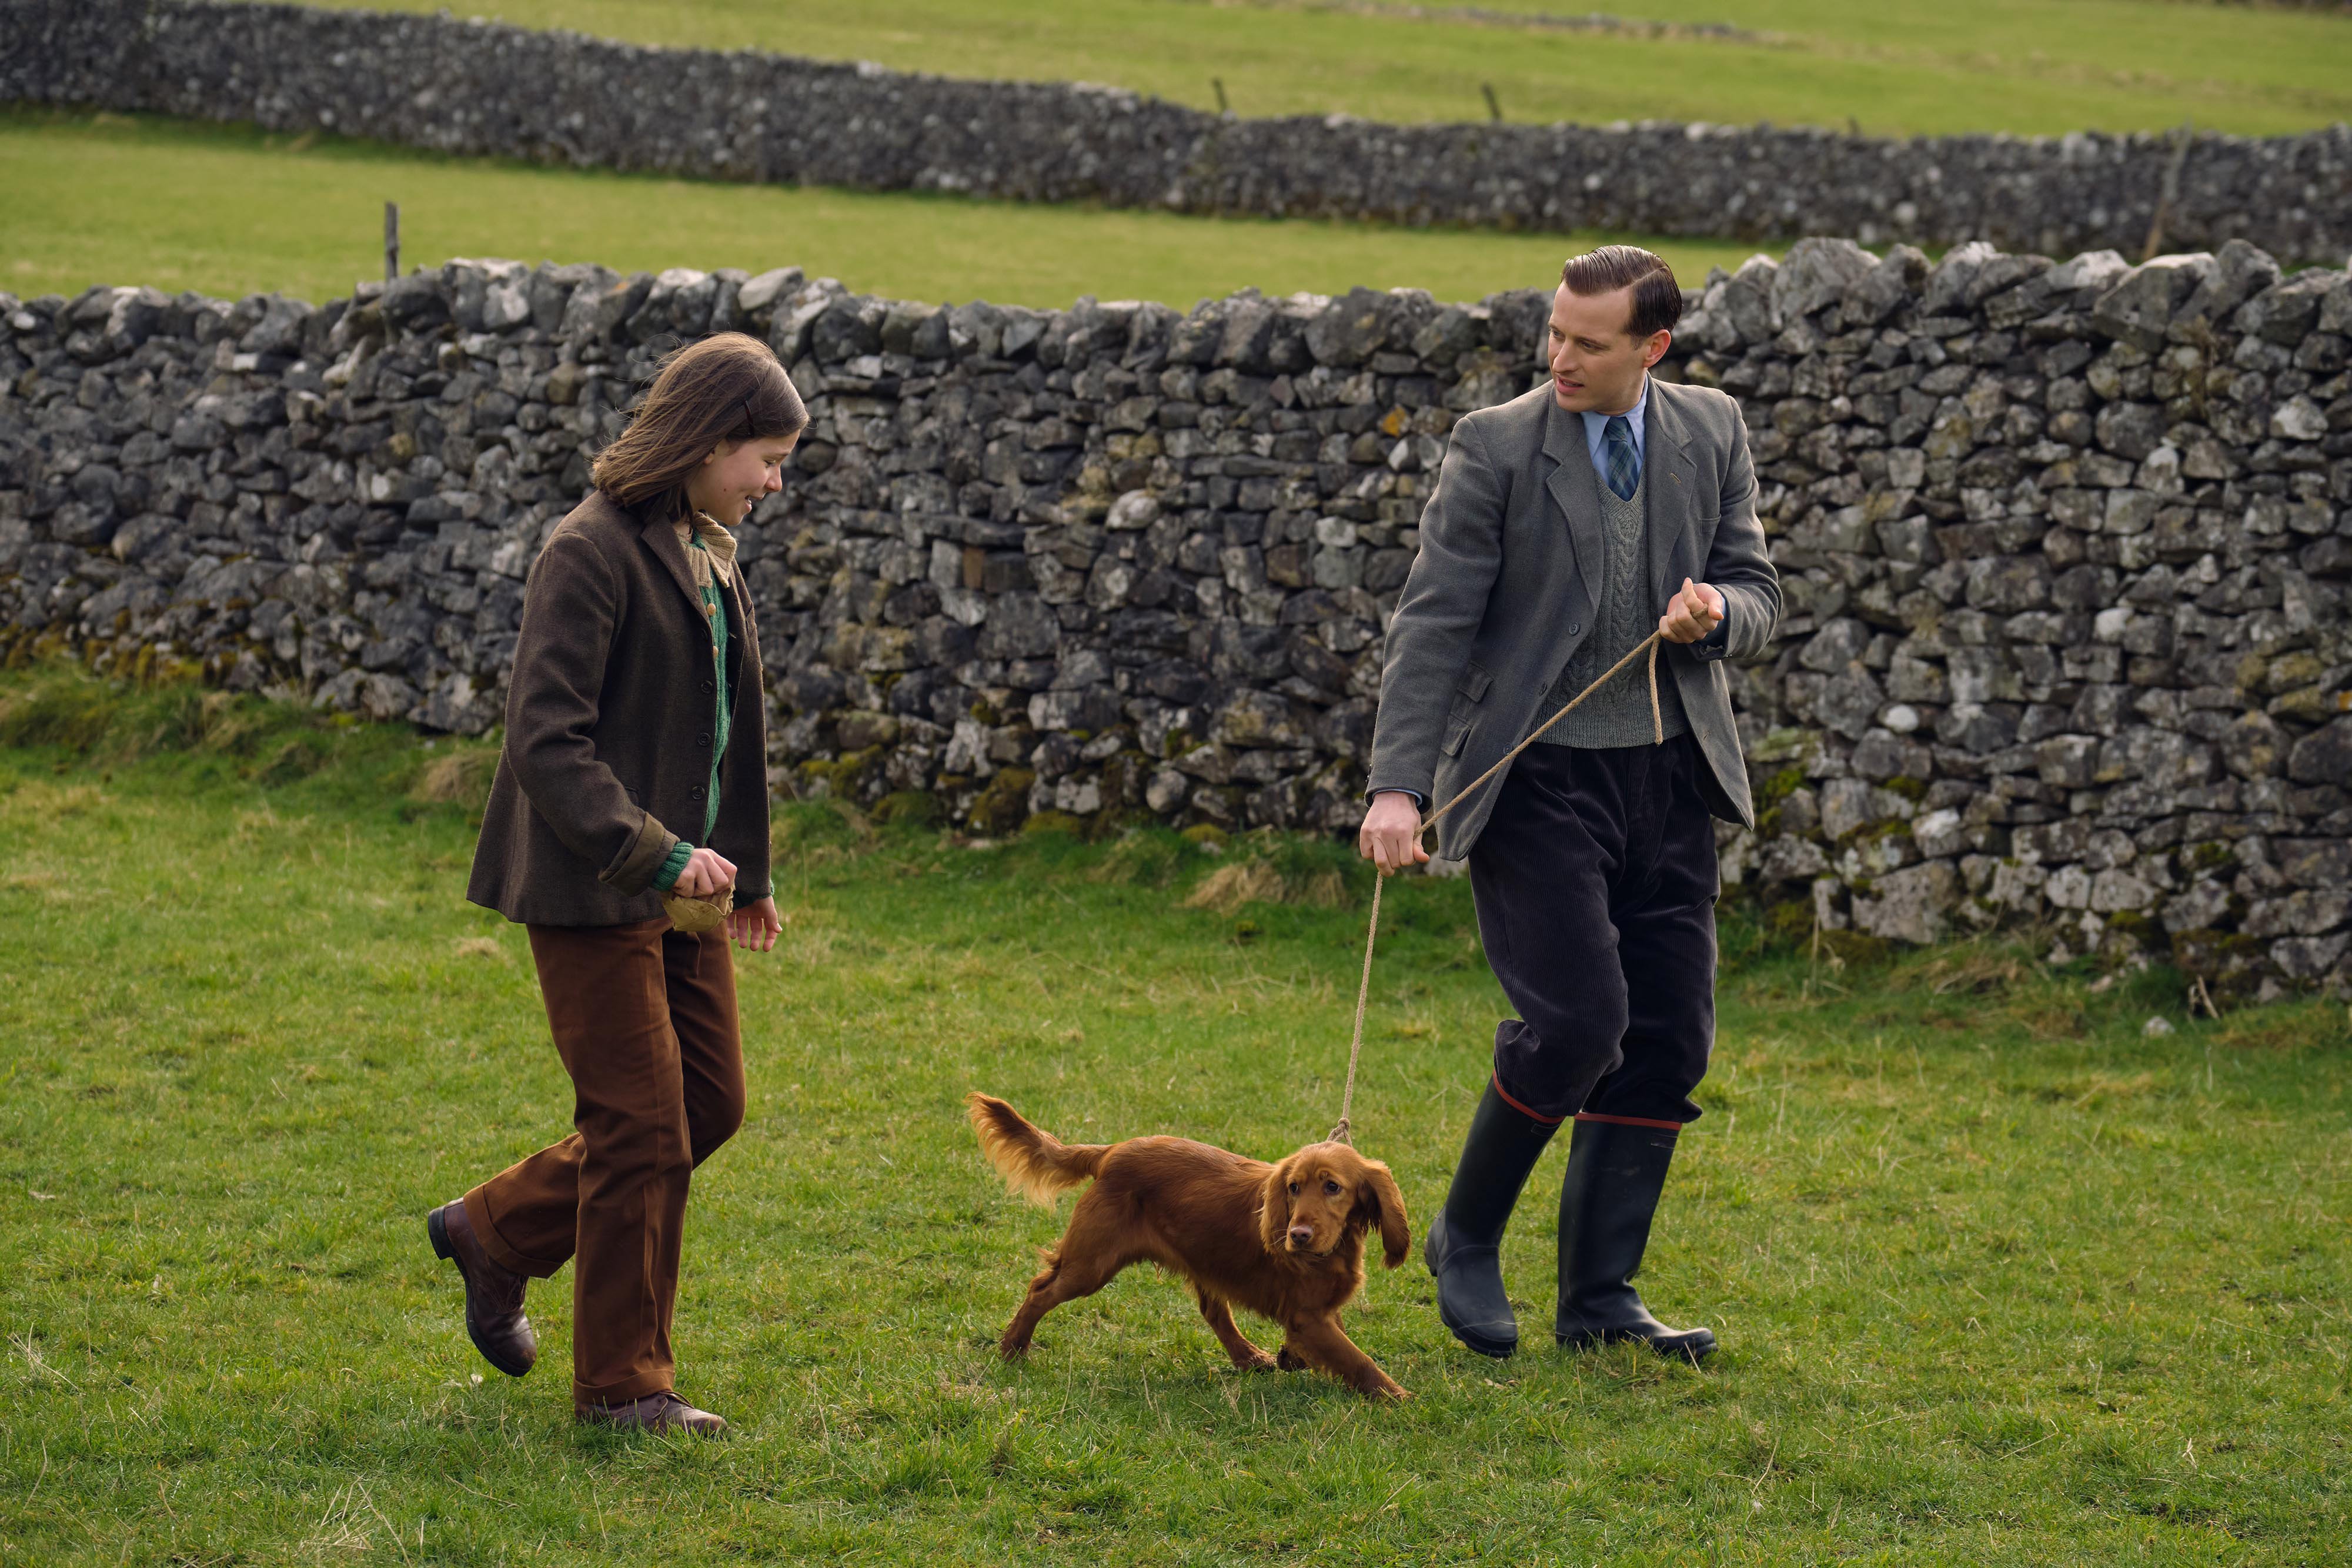 Helen and James, with a dog on a leash, in a scene from 'All Creatures Great and Small' Season 2